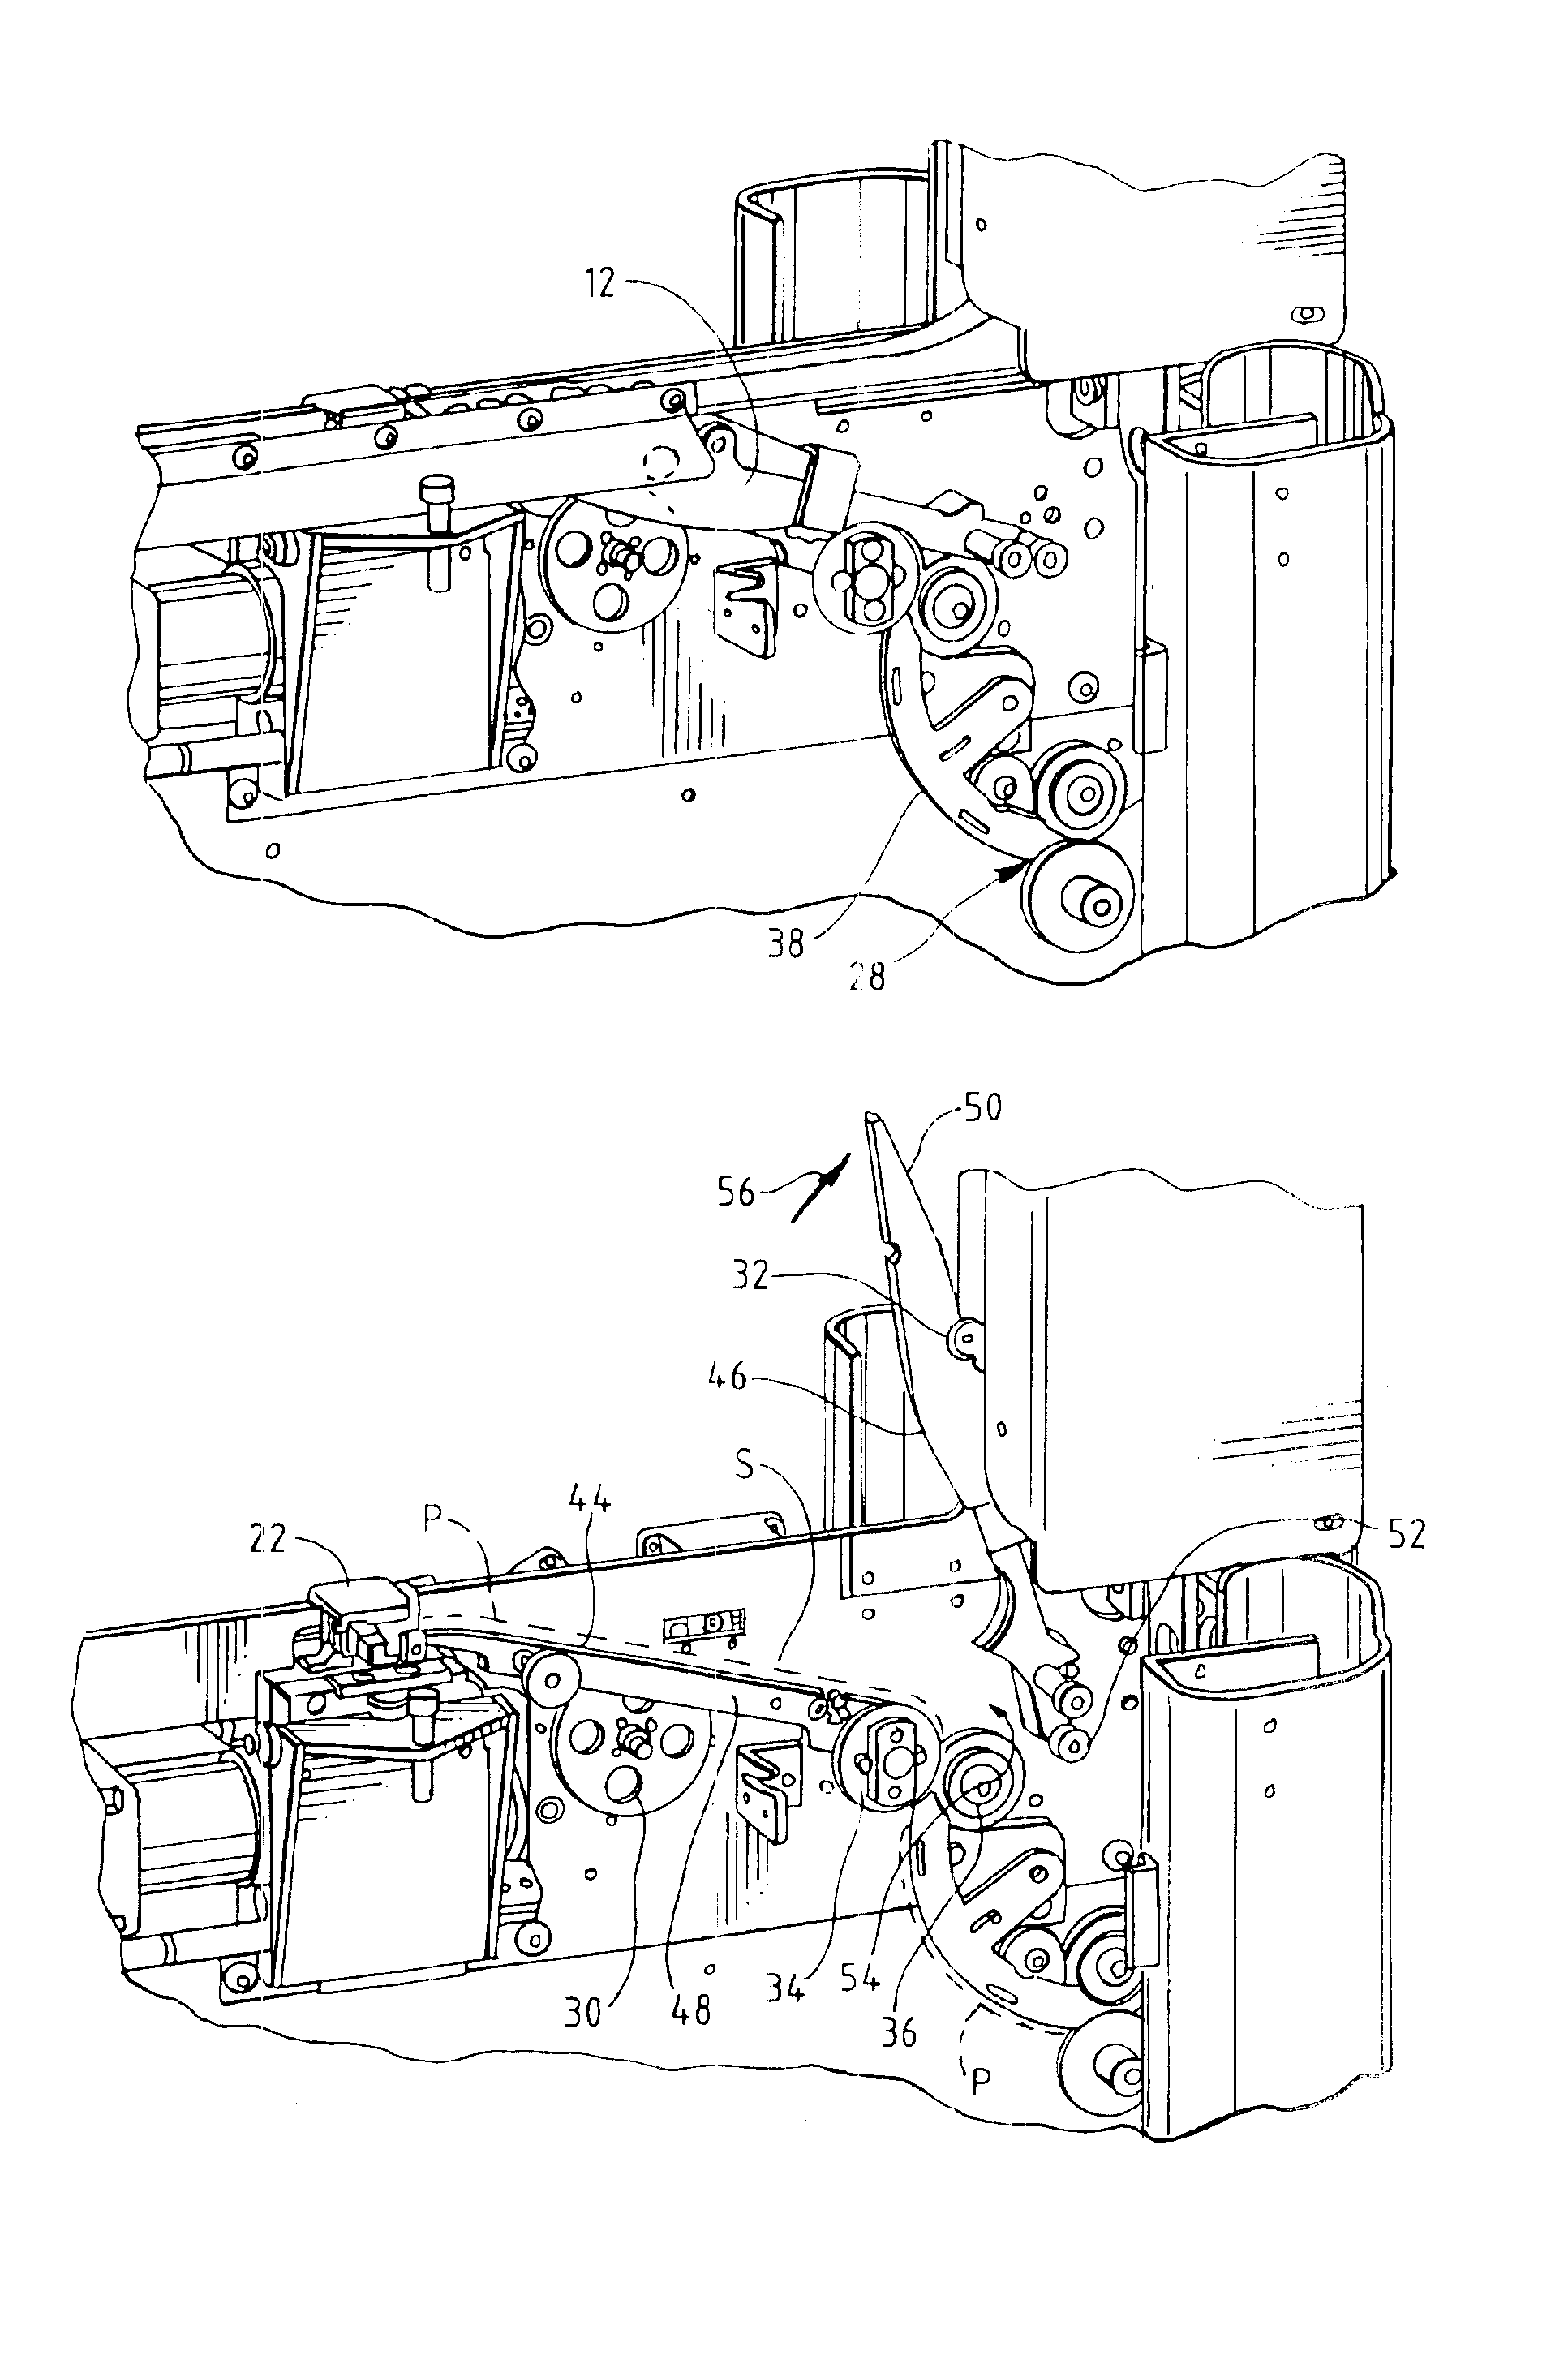 Strapping machine with strap path access guide